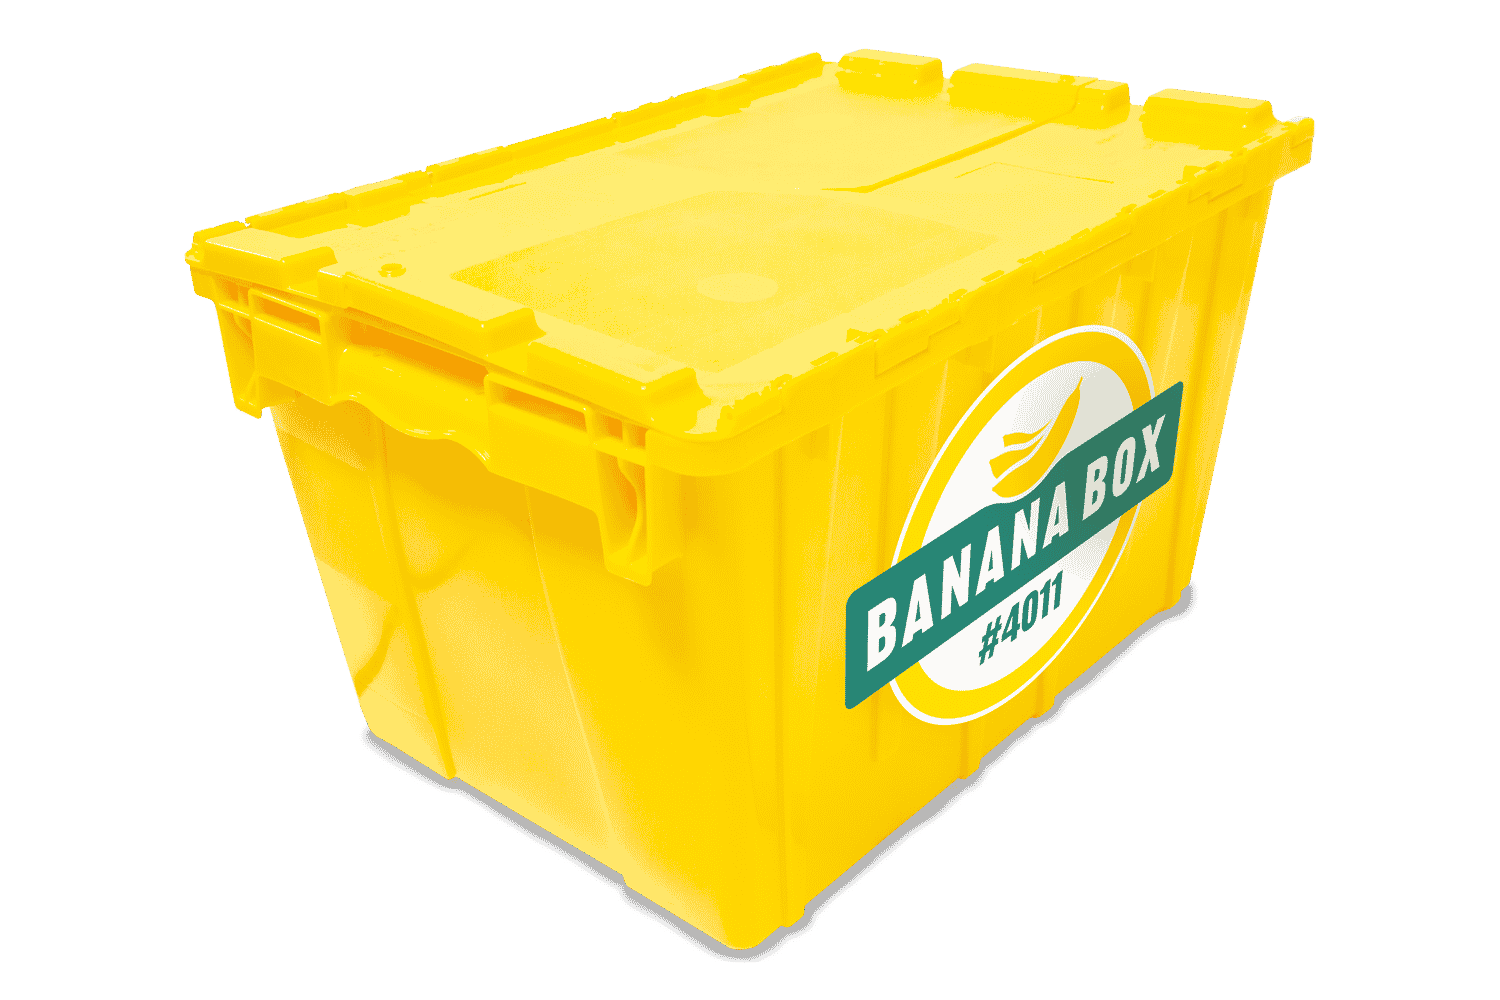 A branded yellow Banana Box plastic moving container